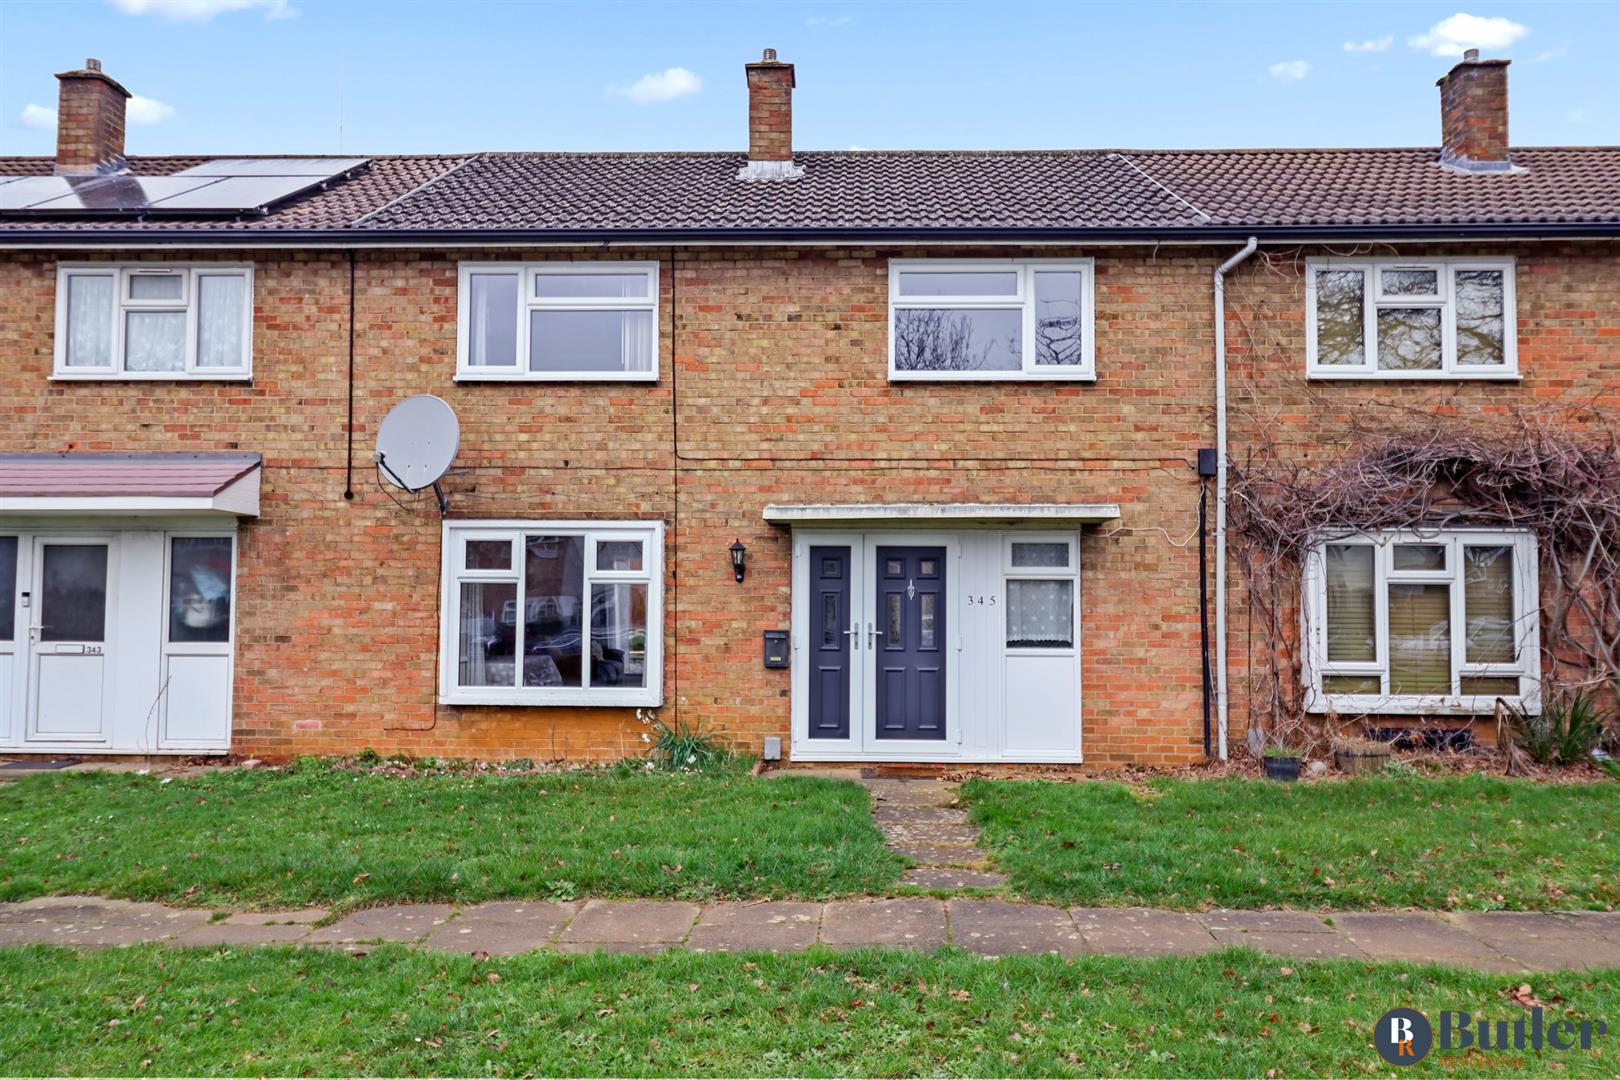 3 bed house for sale in Broadwater Crescent, Stevenage - Property Image 1